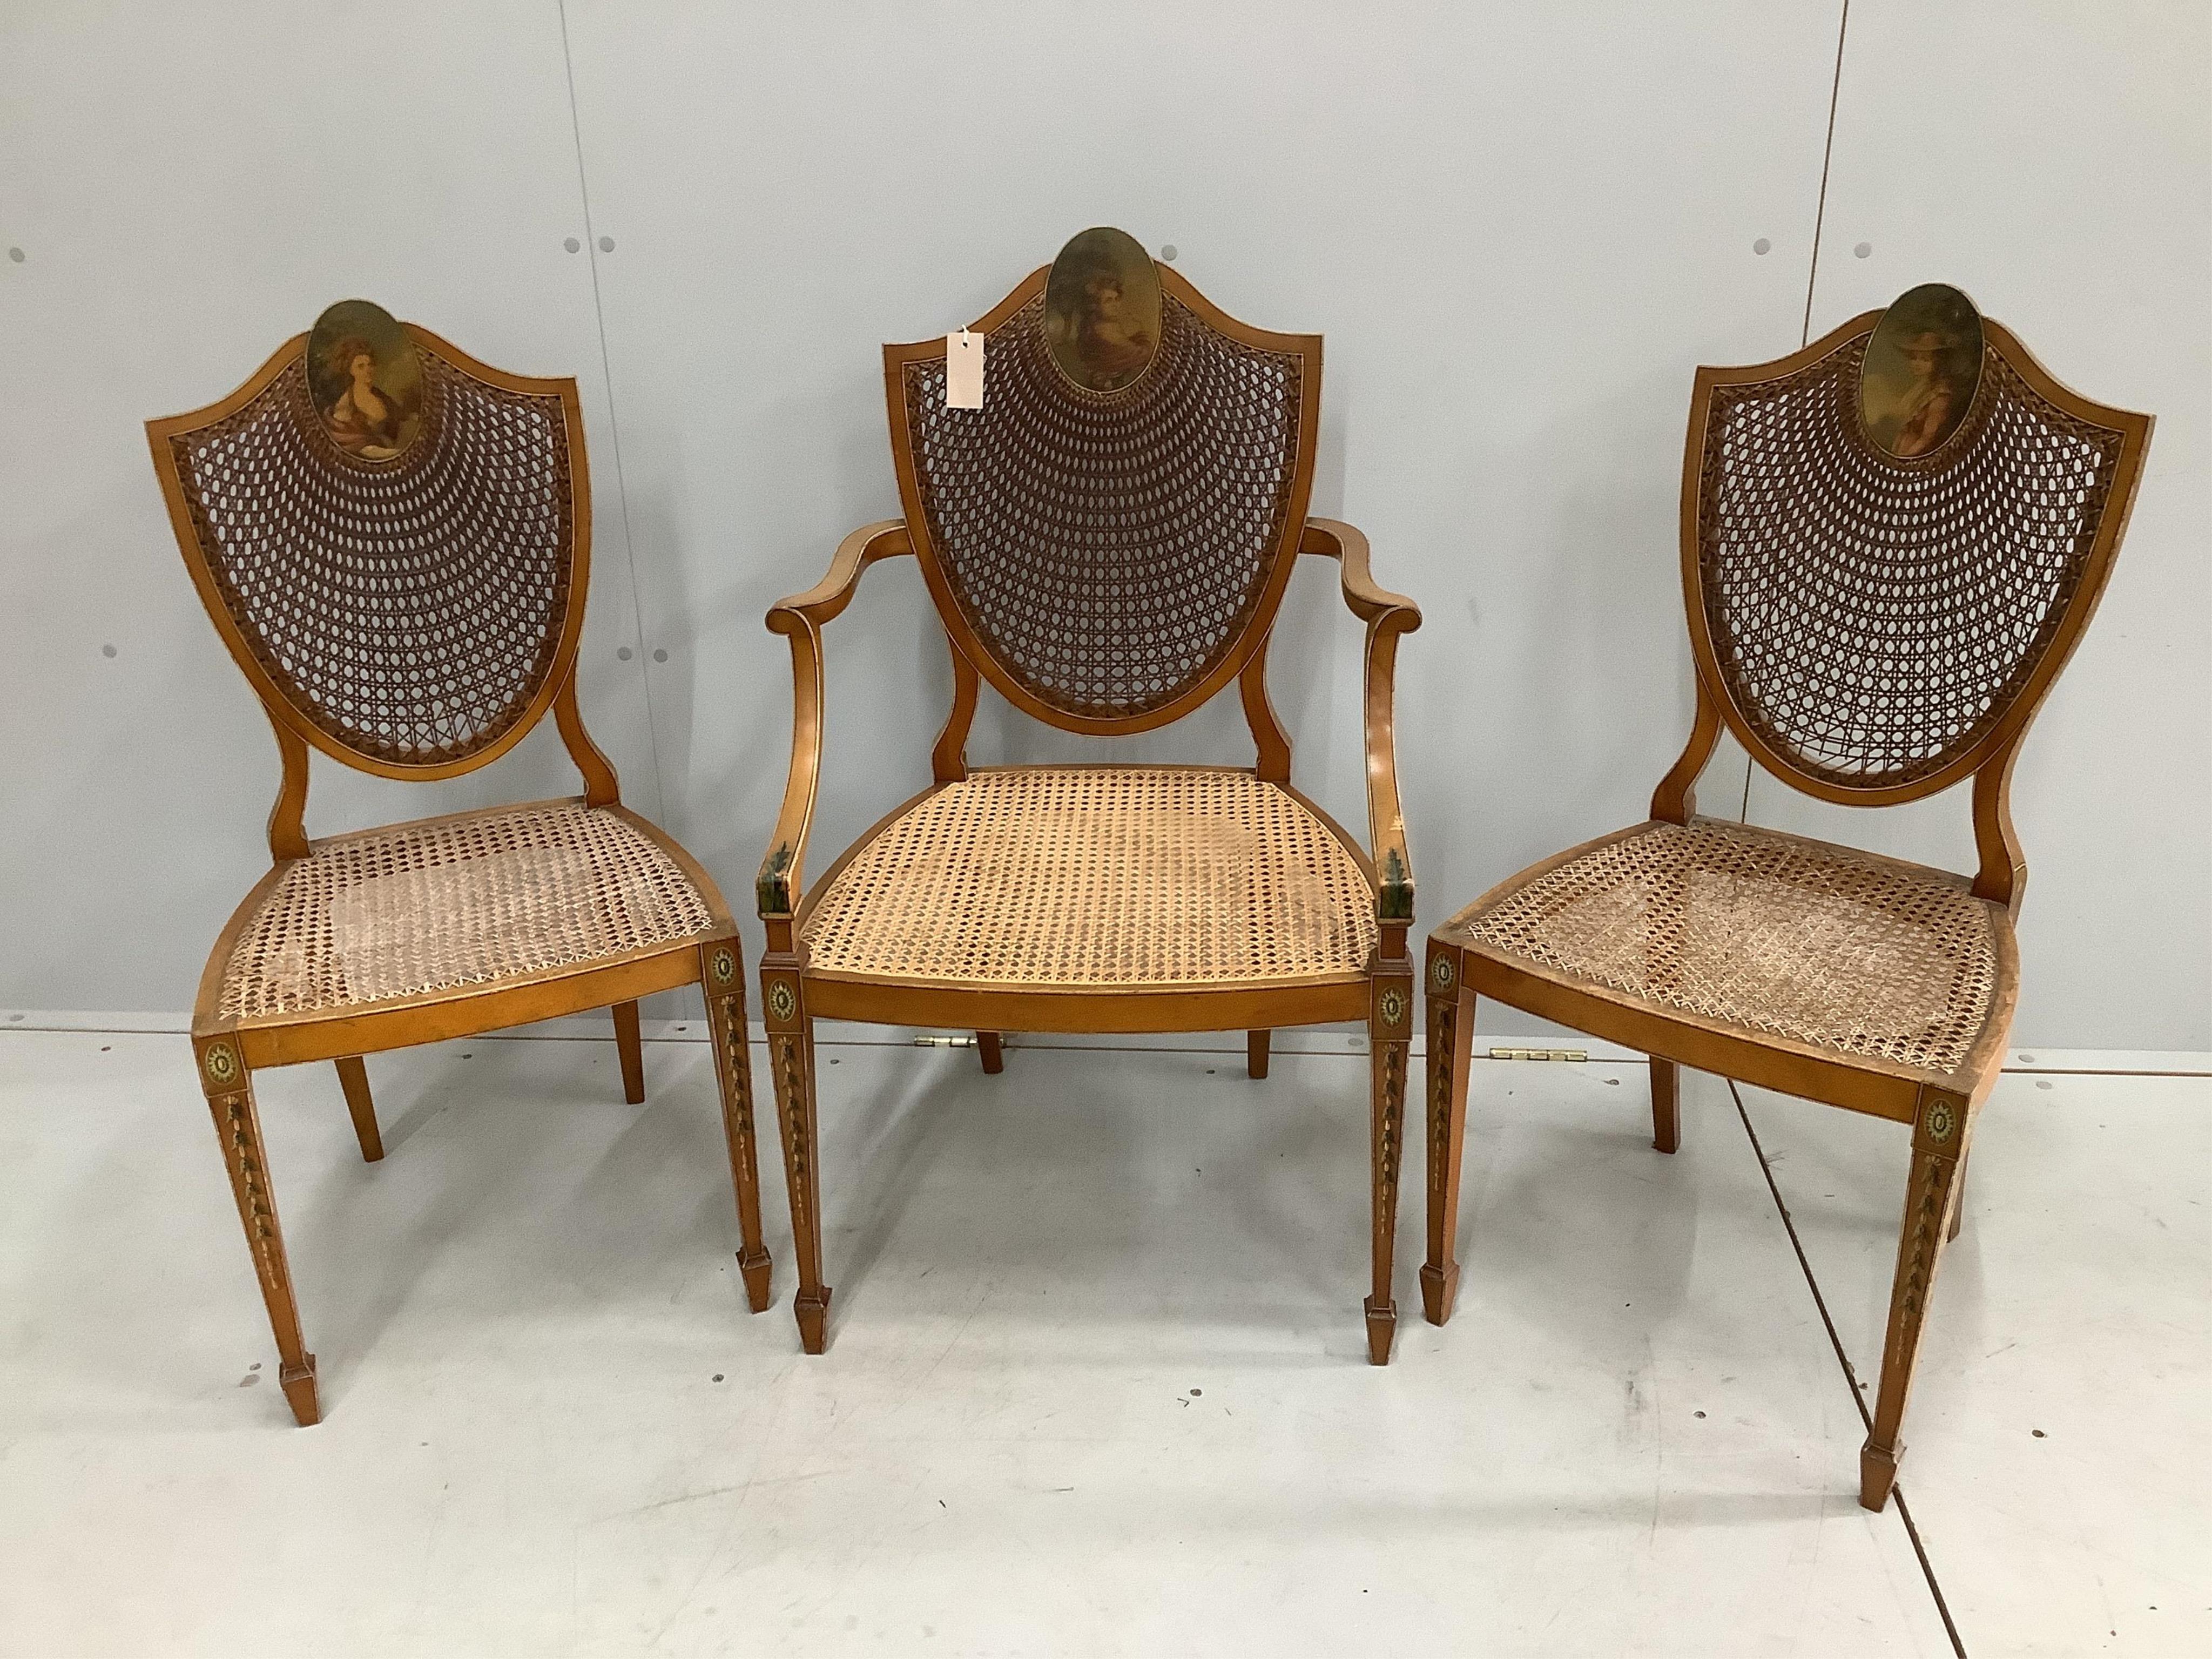 A set of three Edwardian Sheraton Revival painted satinwood caned chairs, one with arms